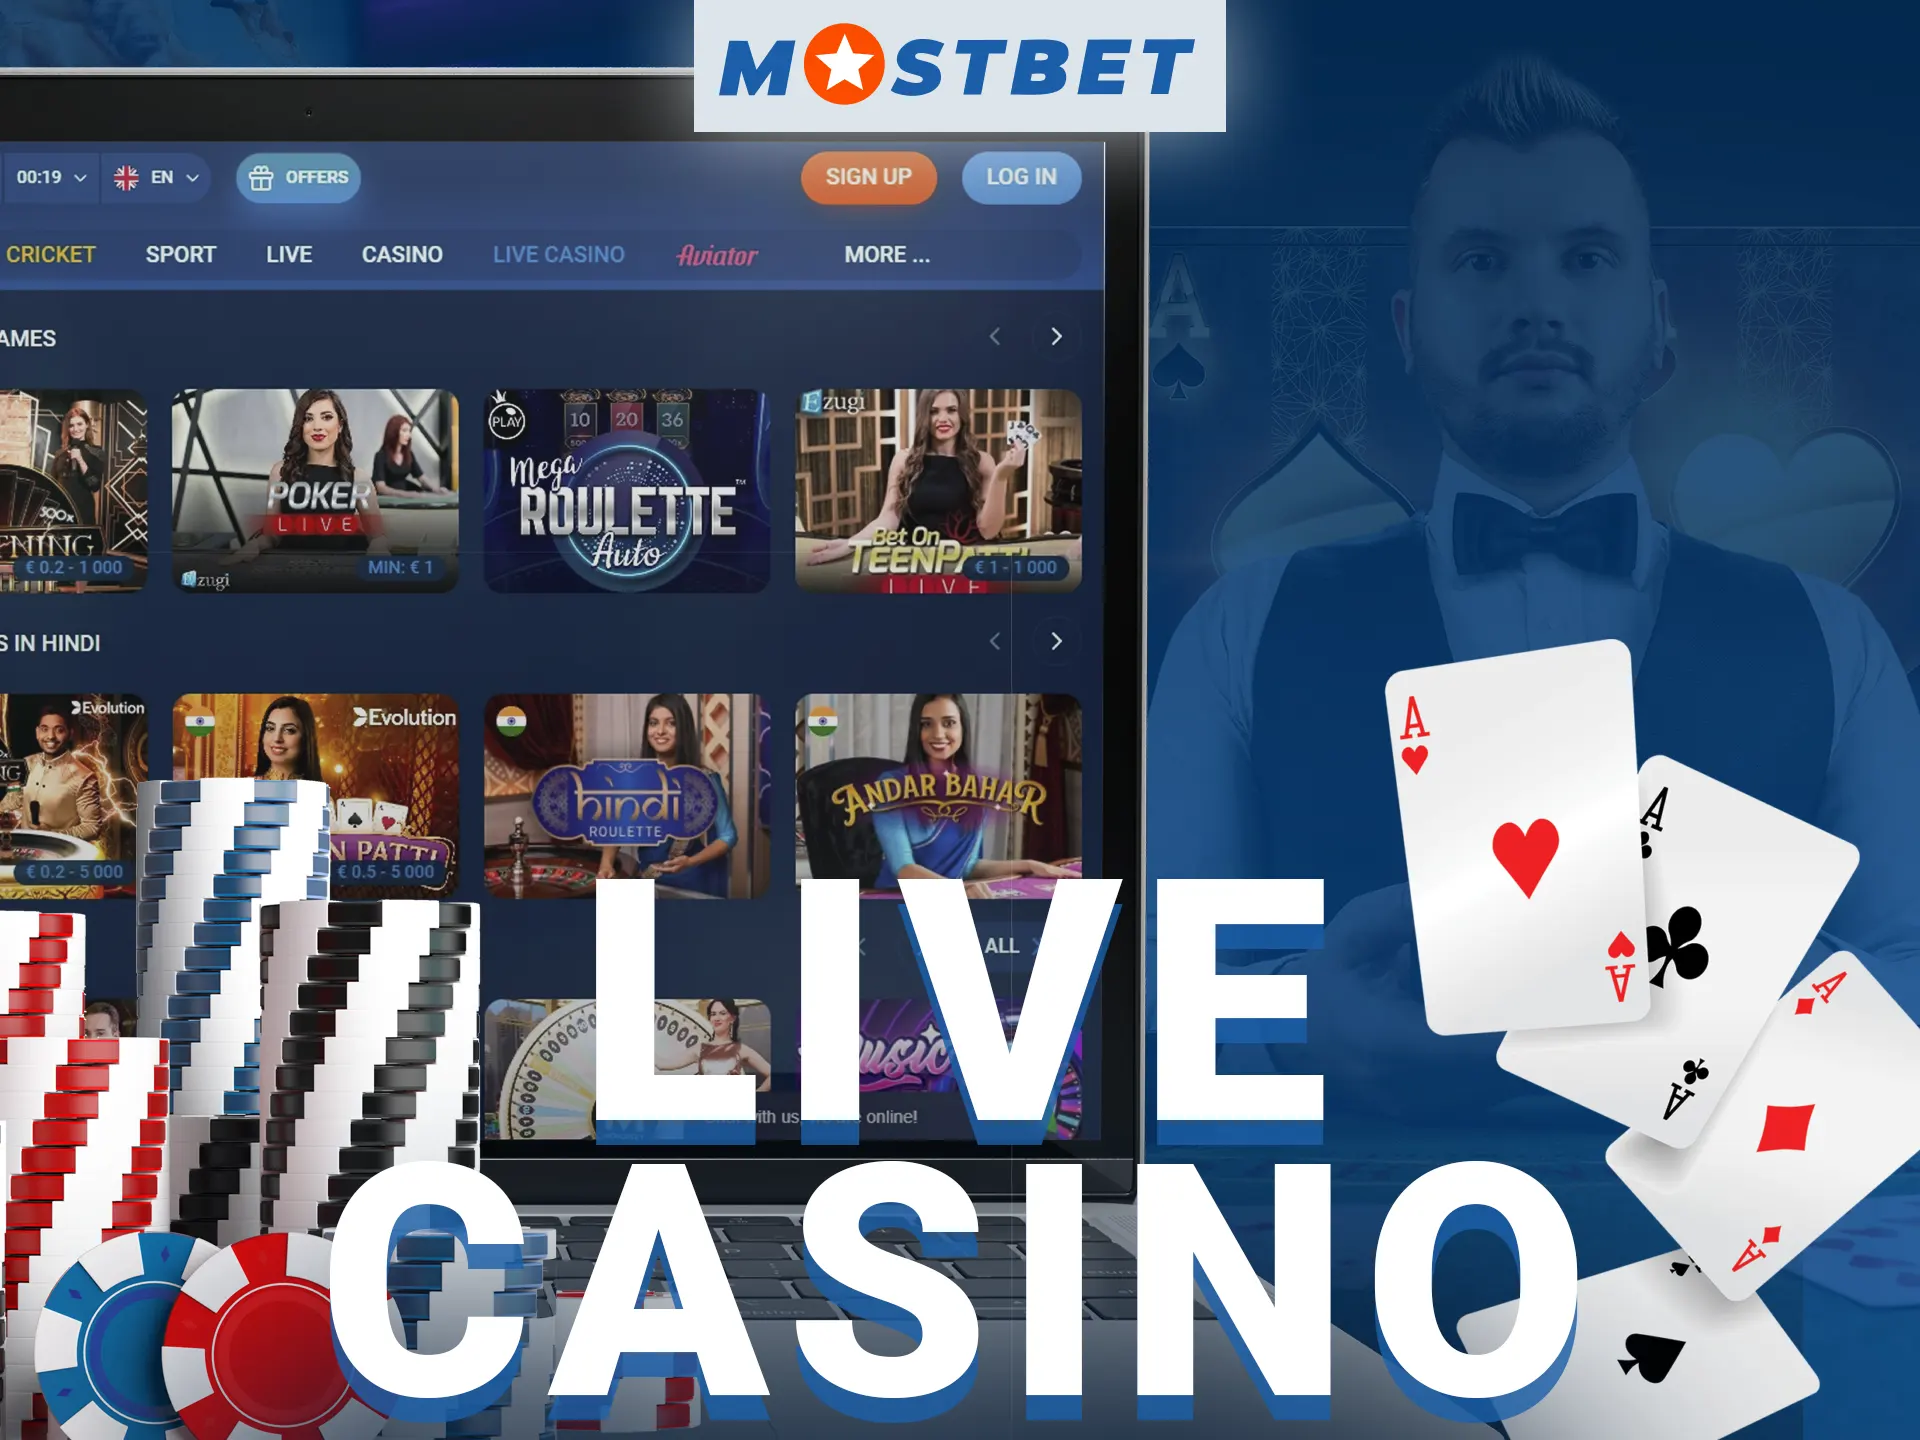 On the Mostbet website, players can interact with live dealers in real-time.